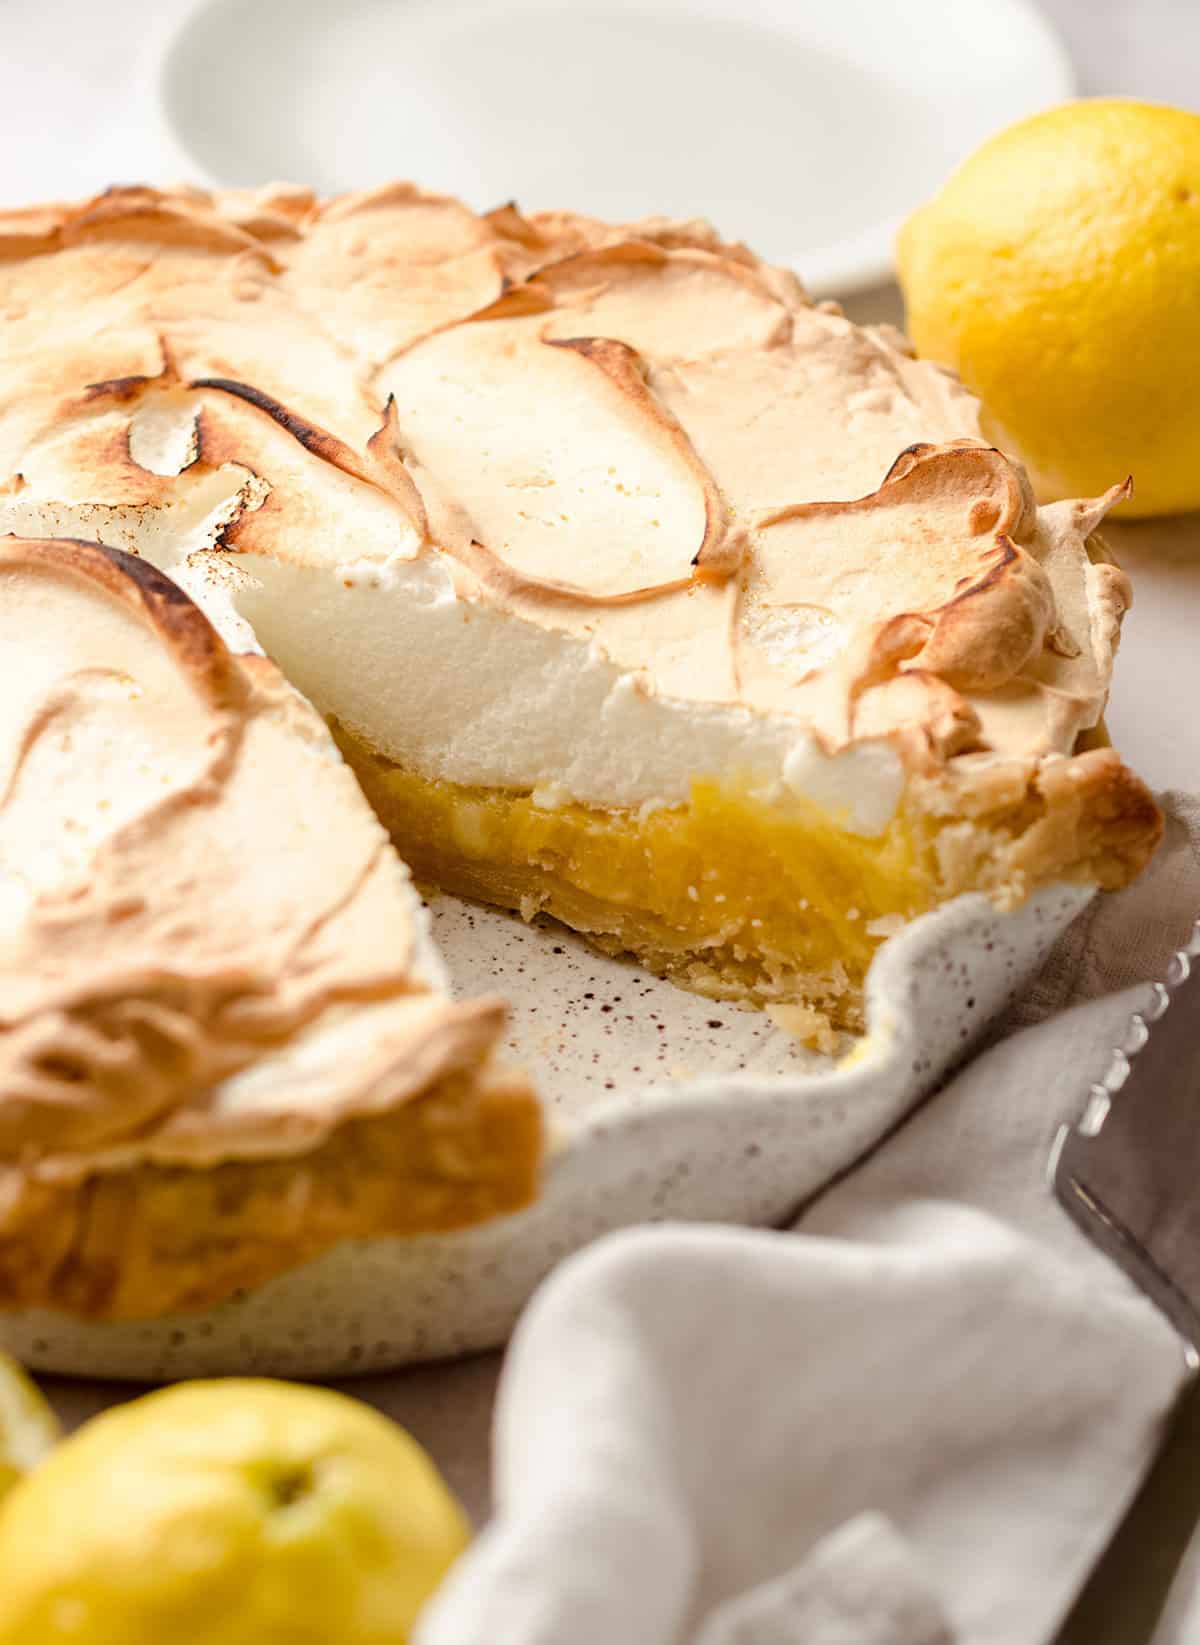 Close up of lemon meringue pie with a slice cut out, with white napkin in foreground.